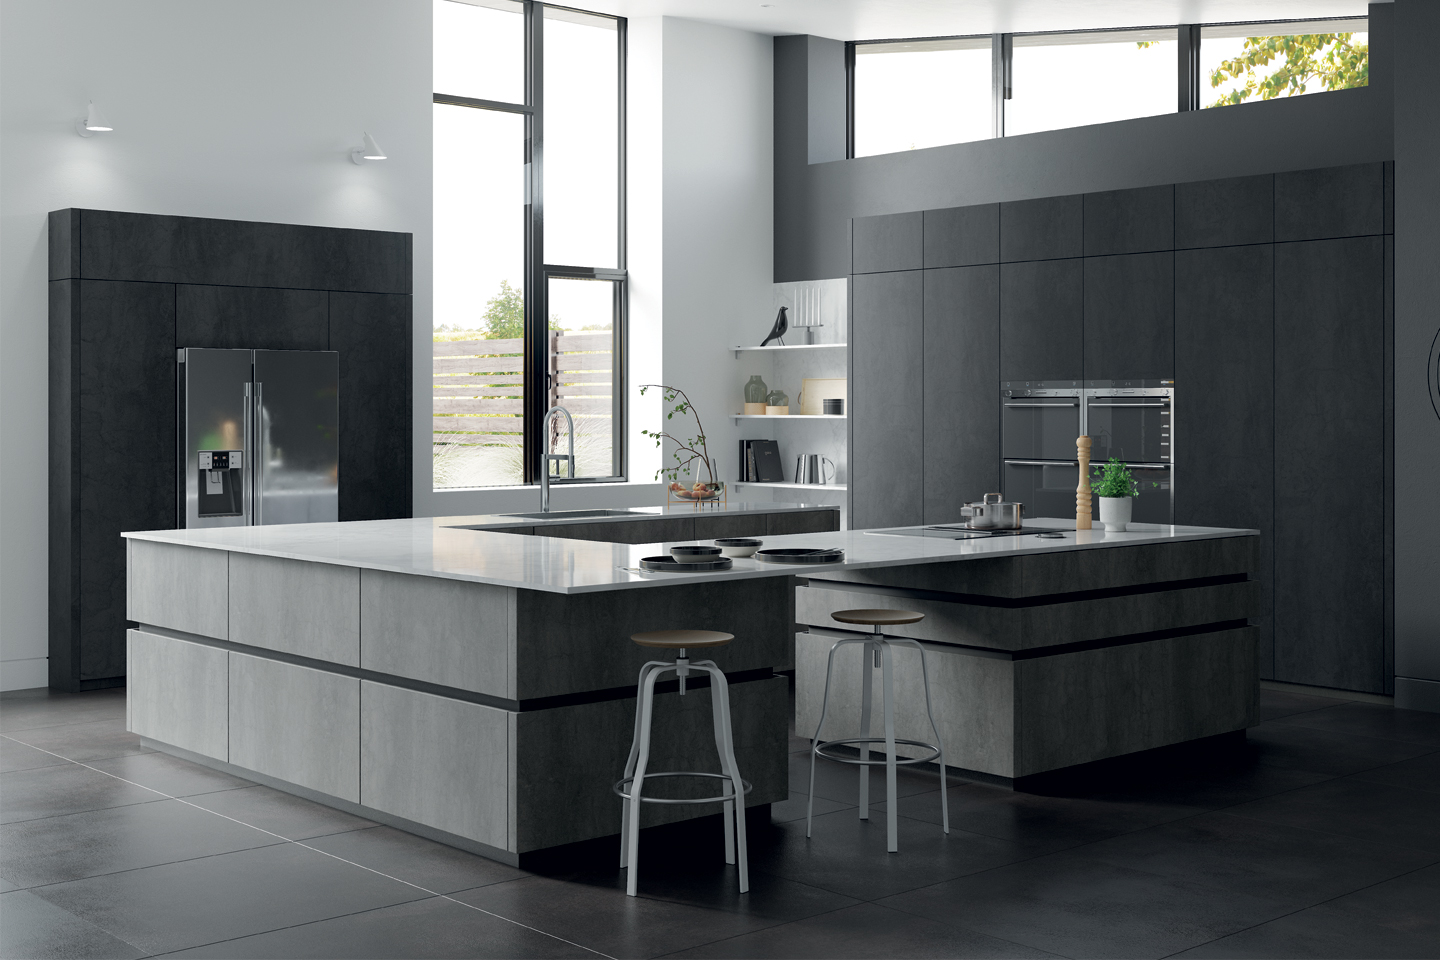 Luxury Kitchens Essex | Total Kitchens by George Rose